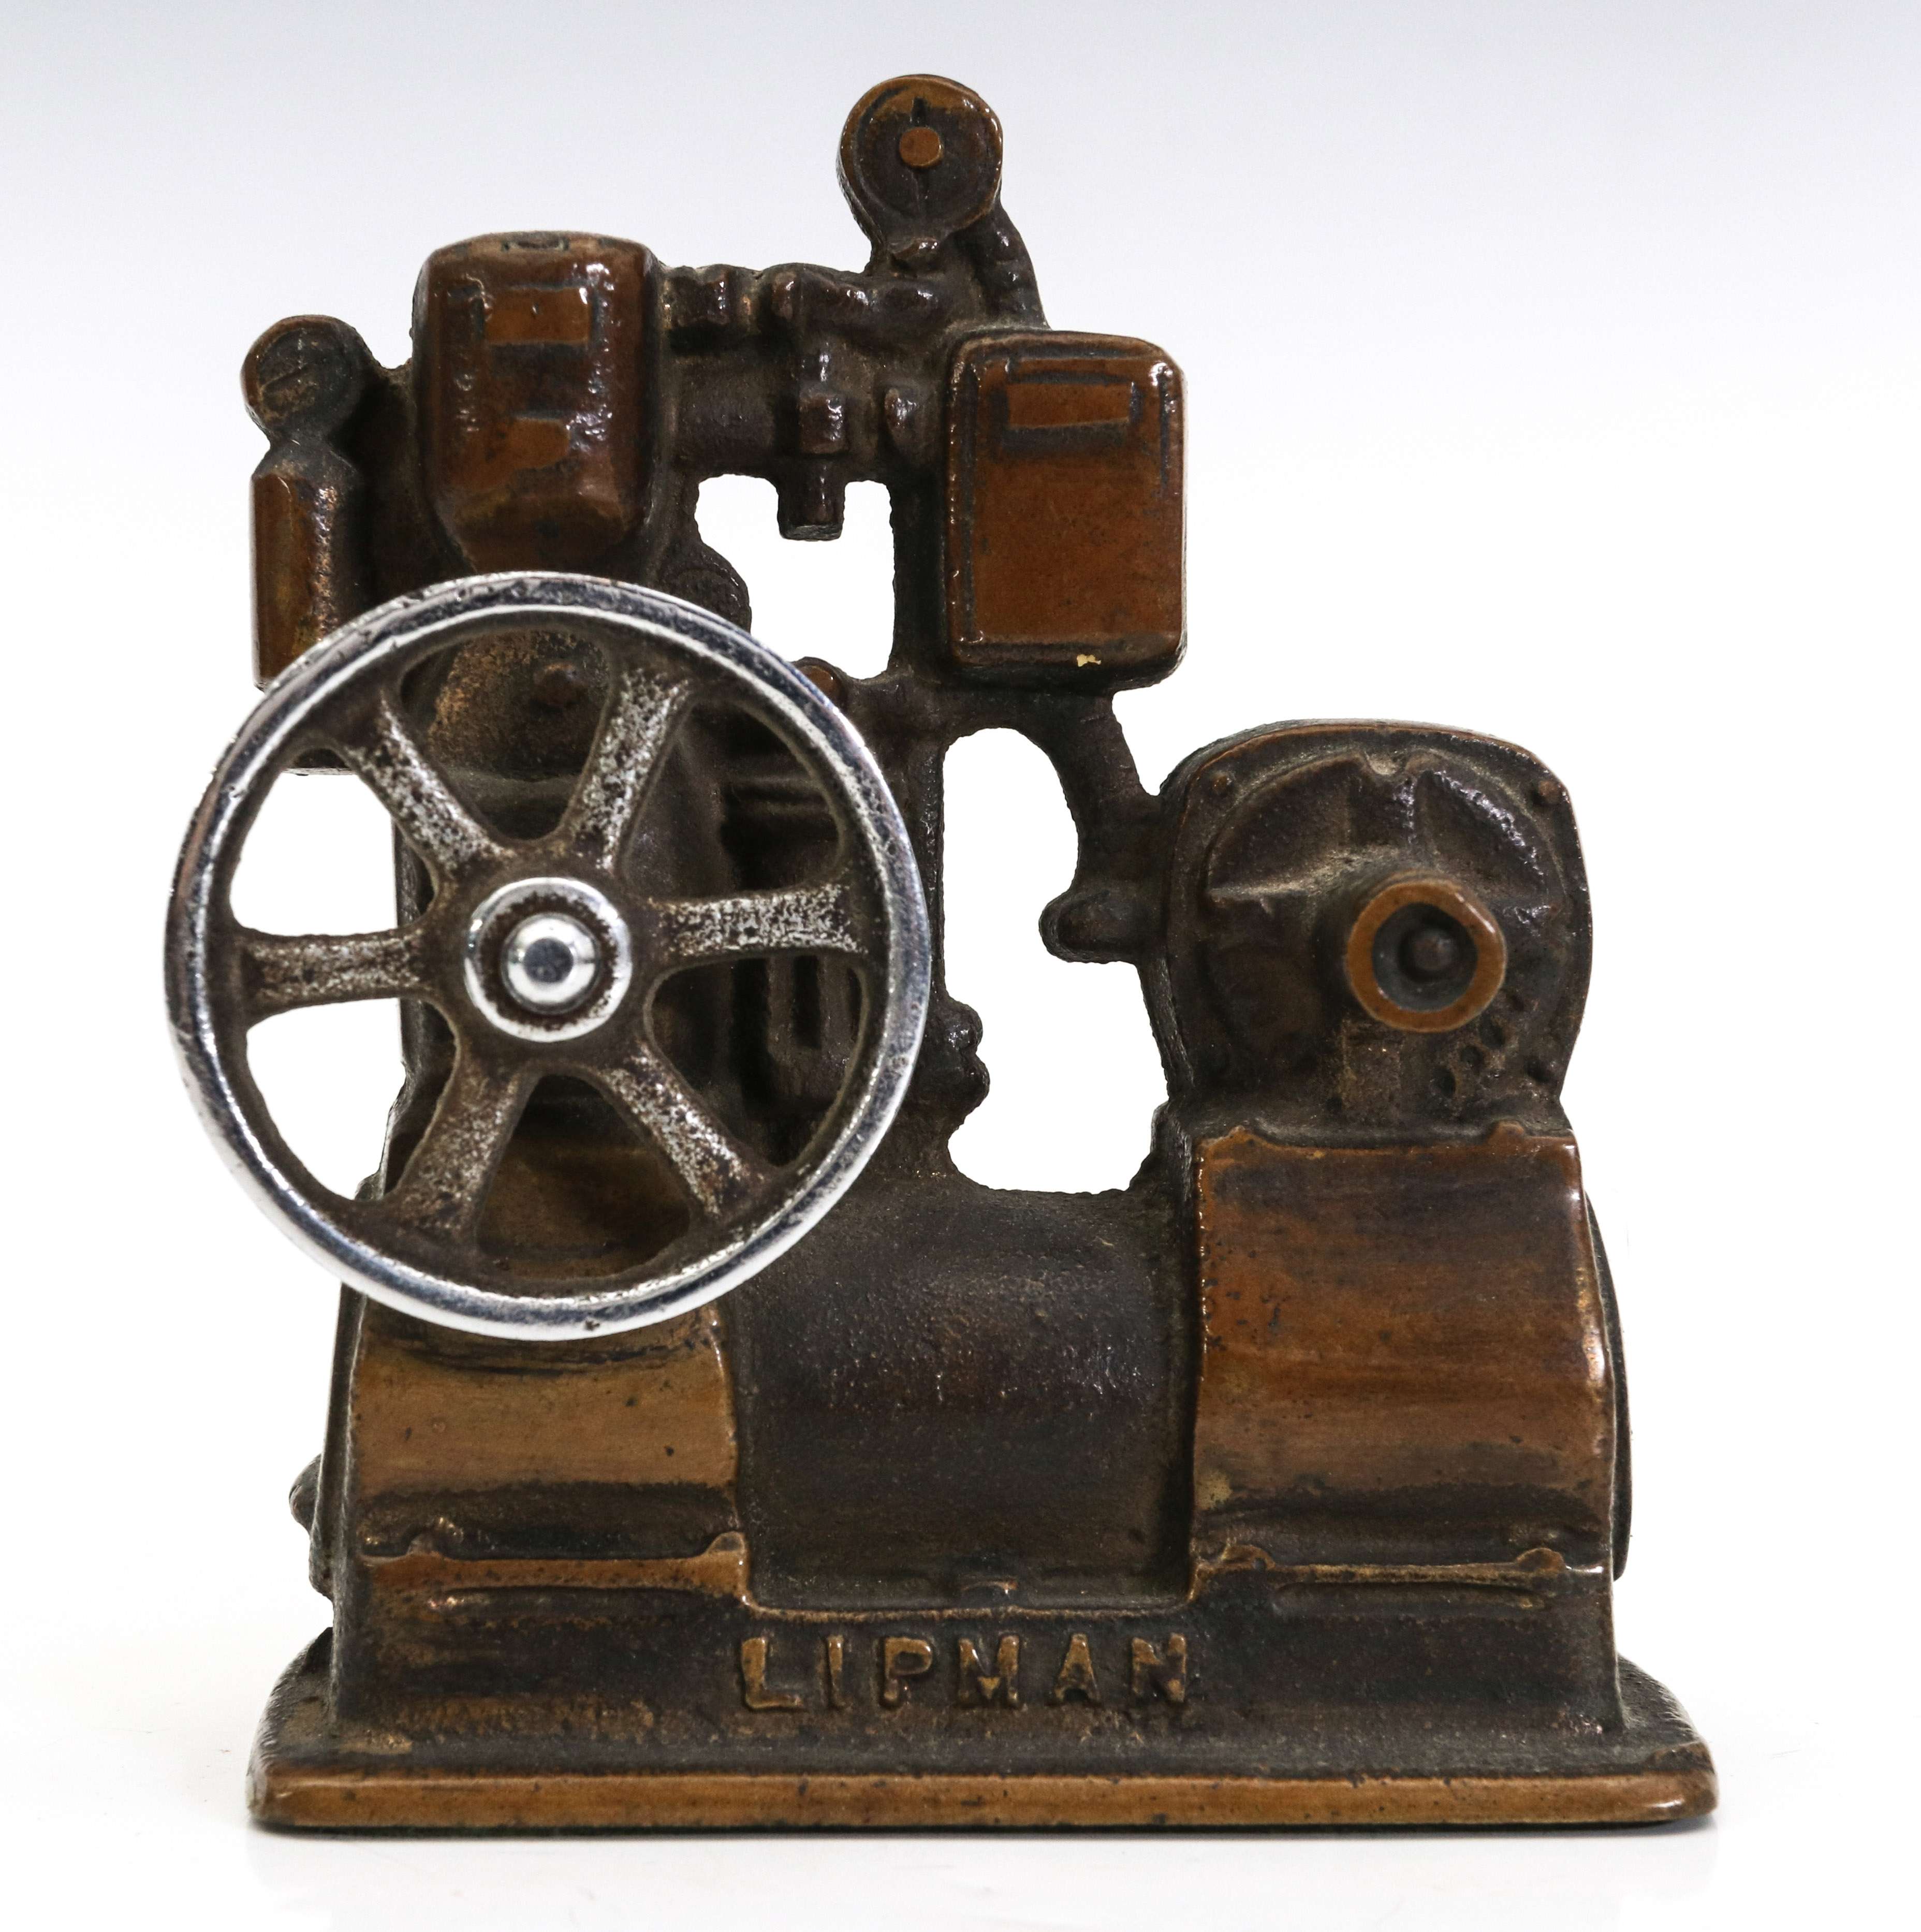 A LIPMAN FIGURAL ENGINE ADVERTISING PAPERWEIGHT